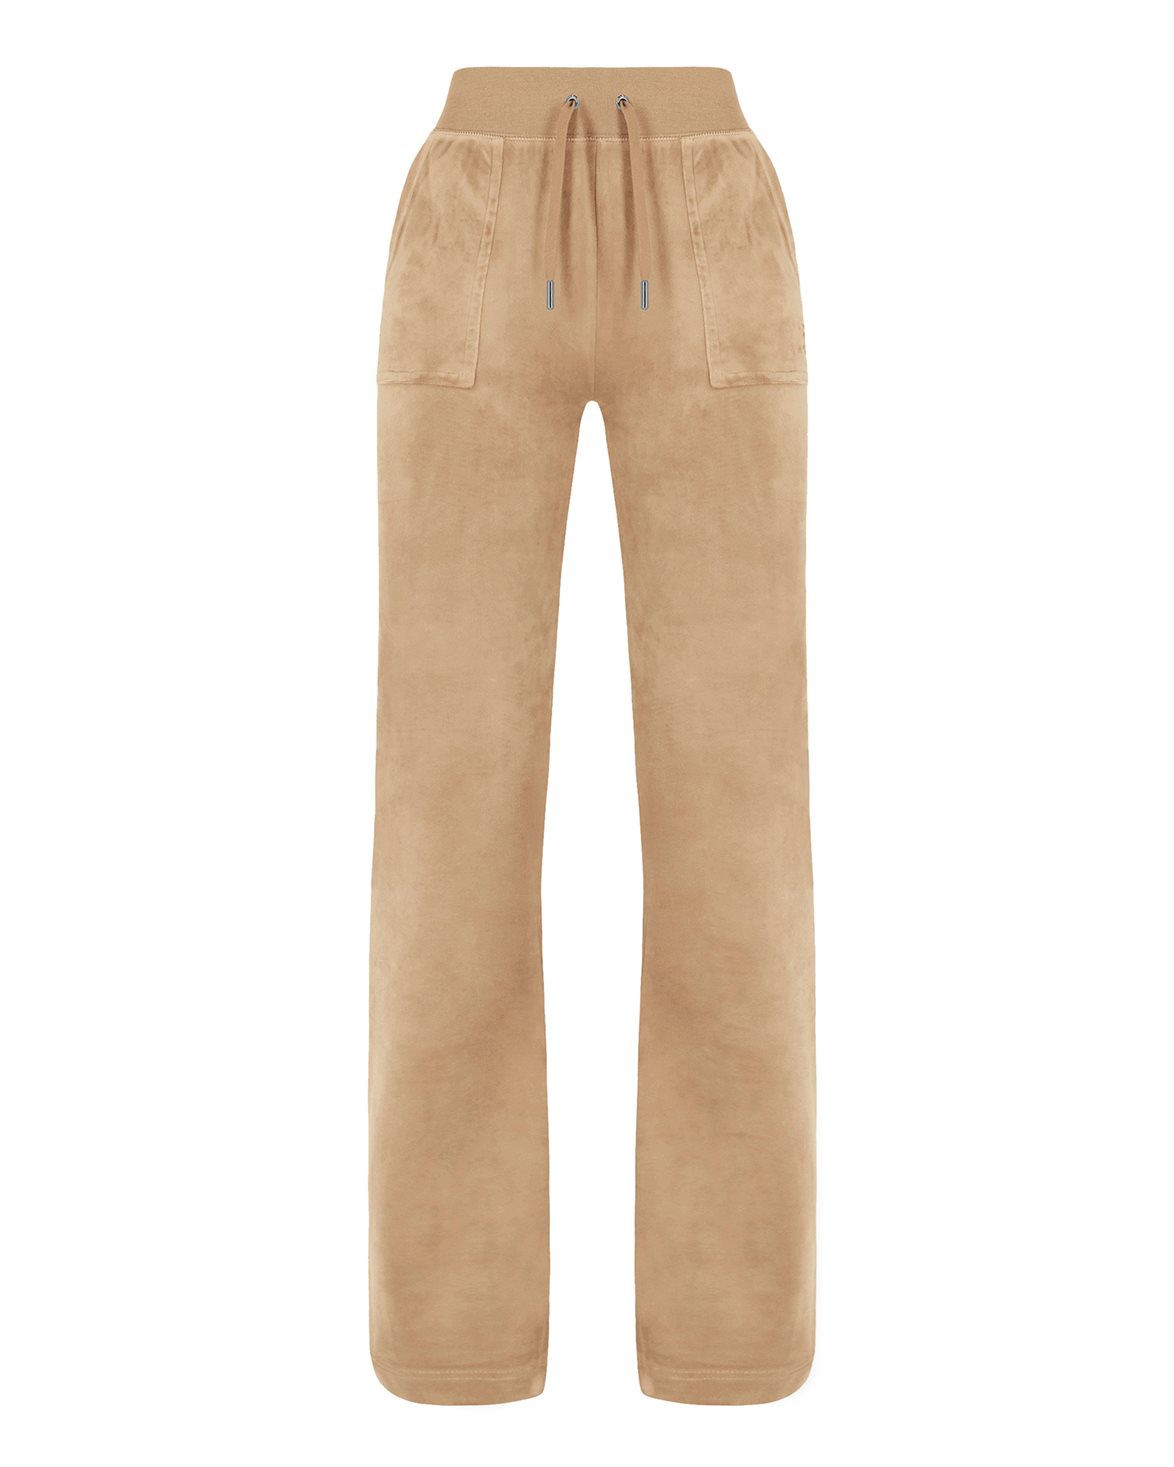 Juicy Couture Del Ray Classic Velour Pants Nomad